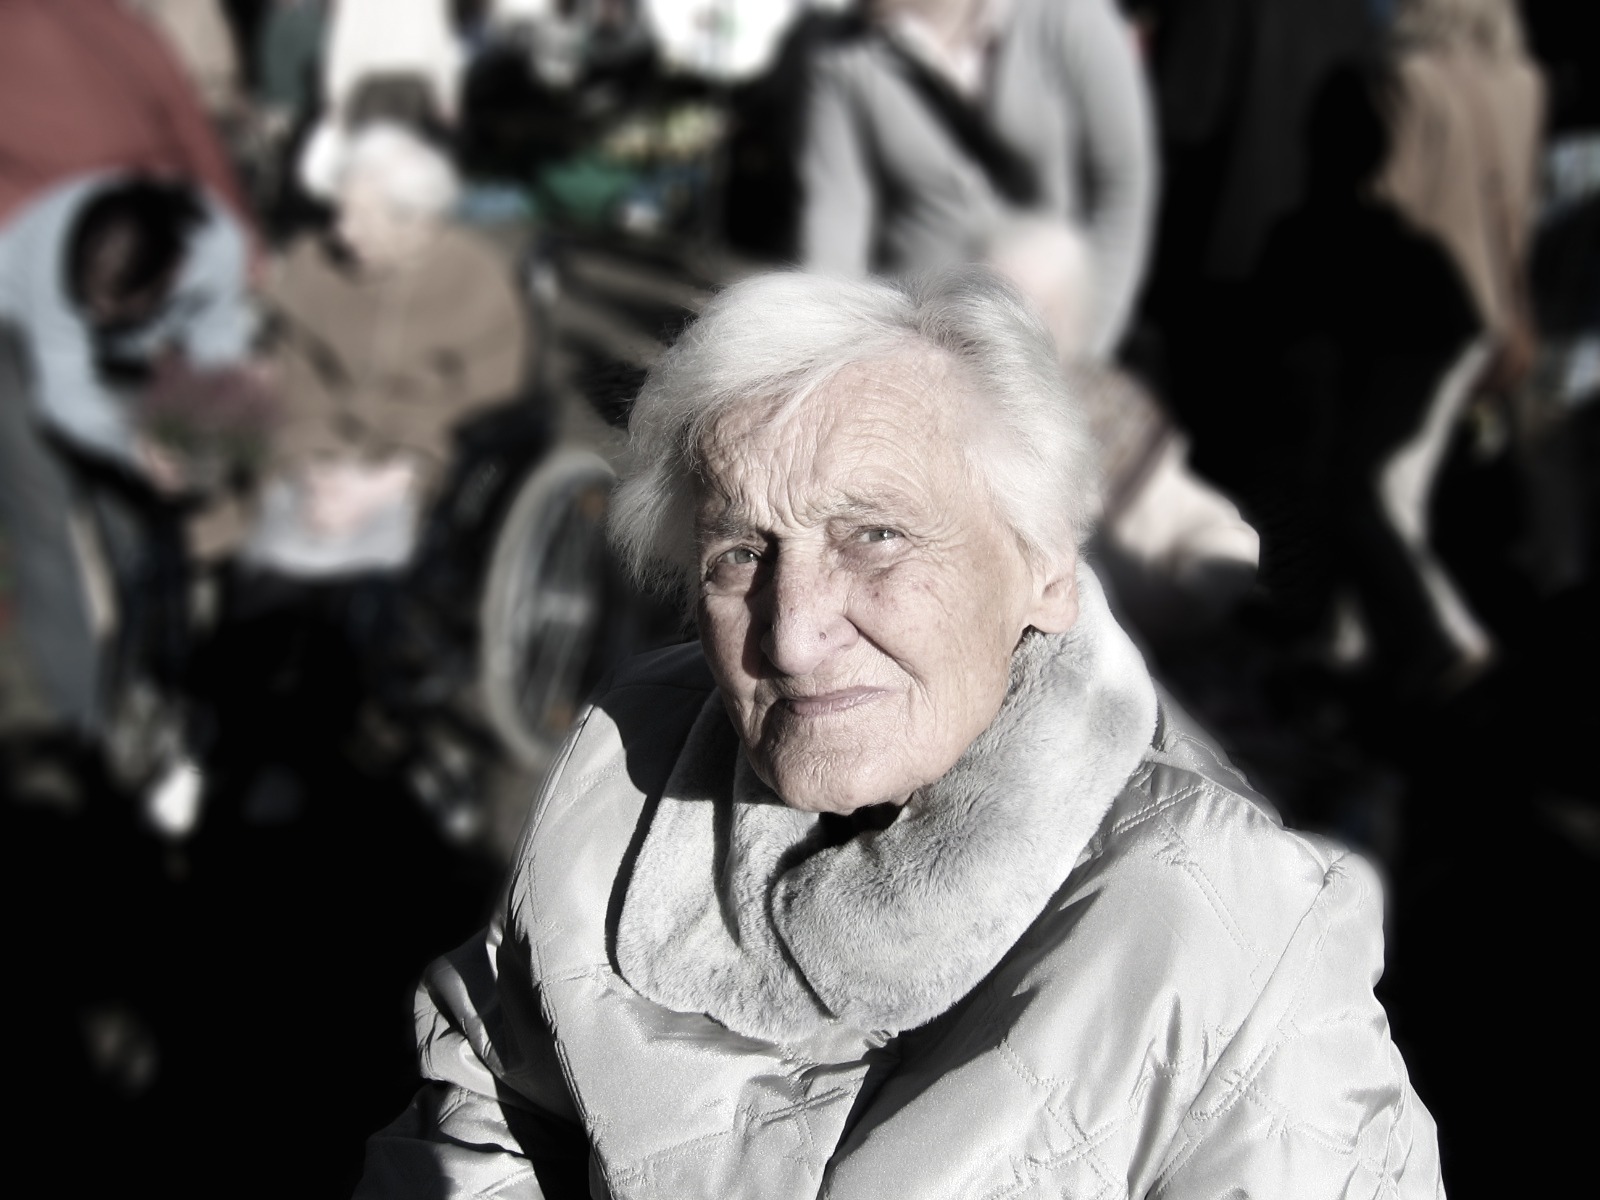 dependent-dementia-woman-old-40900